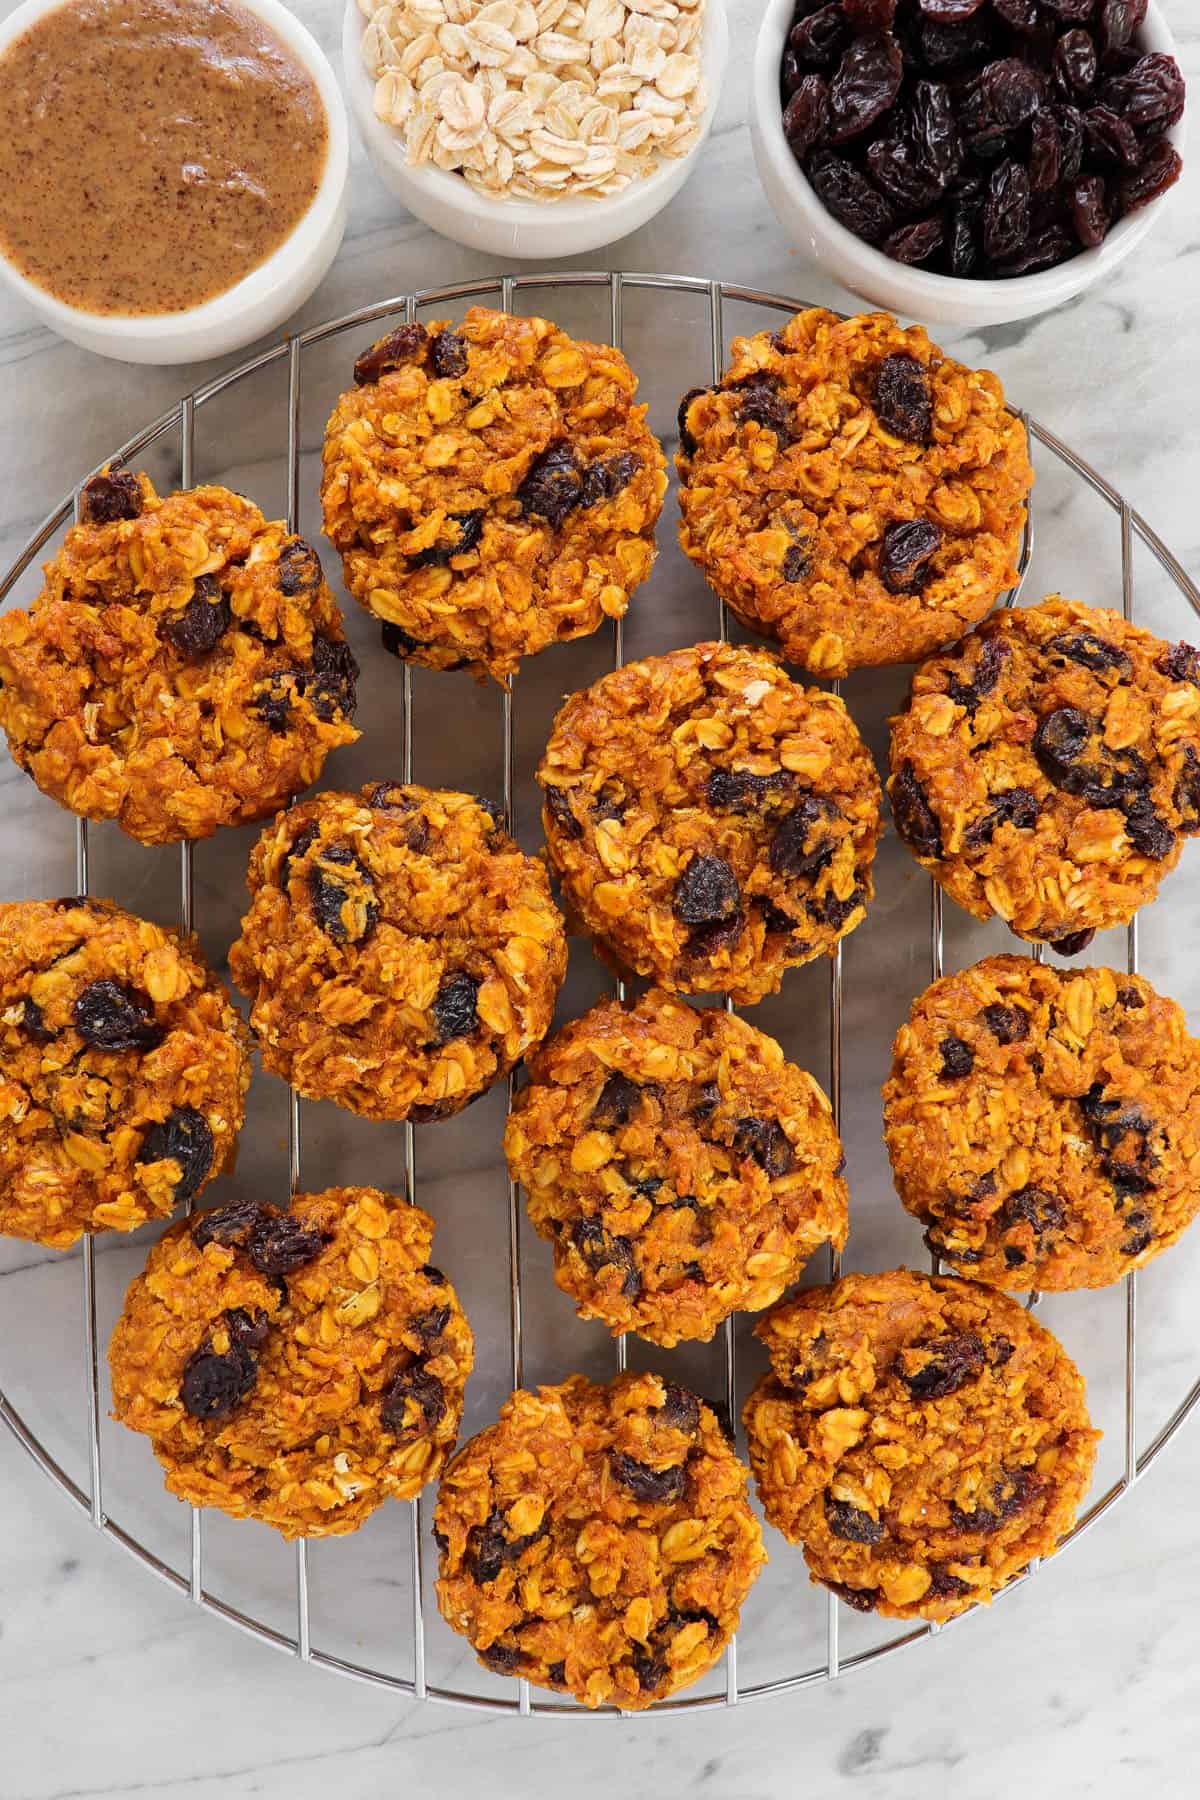 Sweet potato cookies on cooling rack with nut butter, oats and raisins in mini bowls on the side.